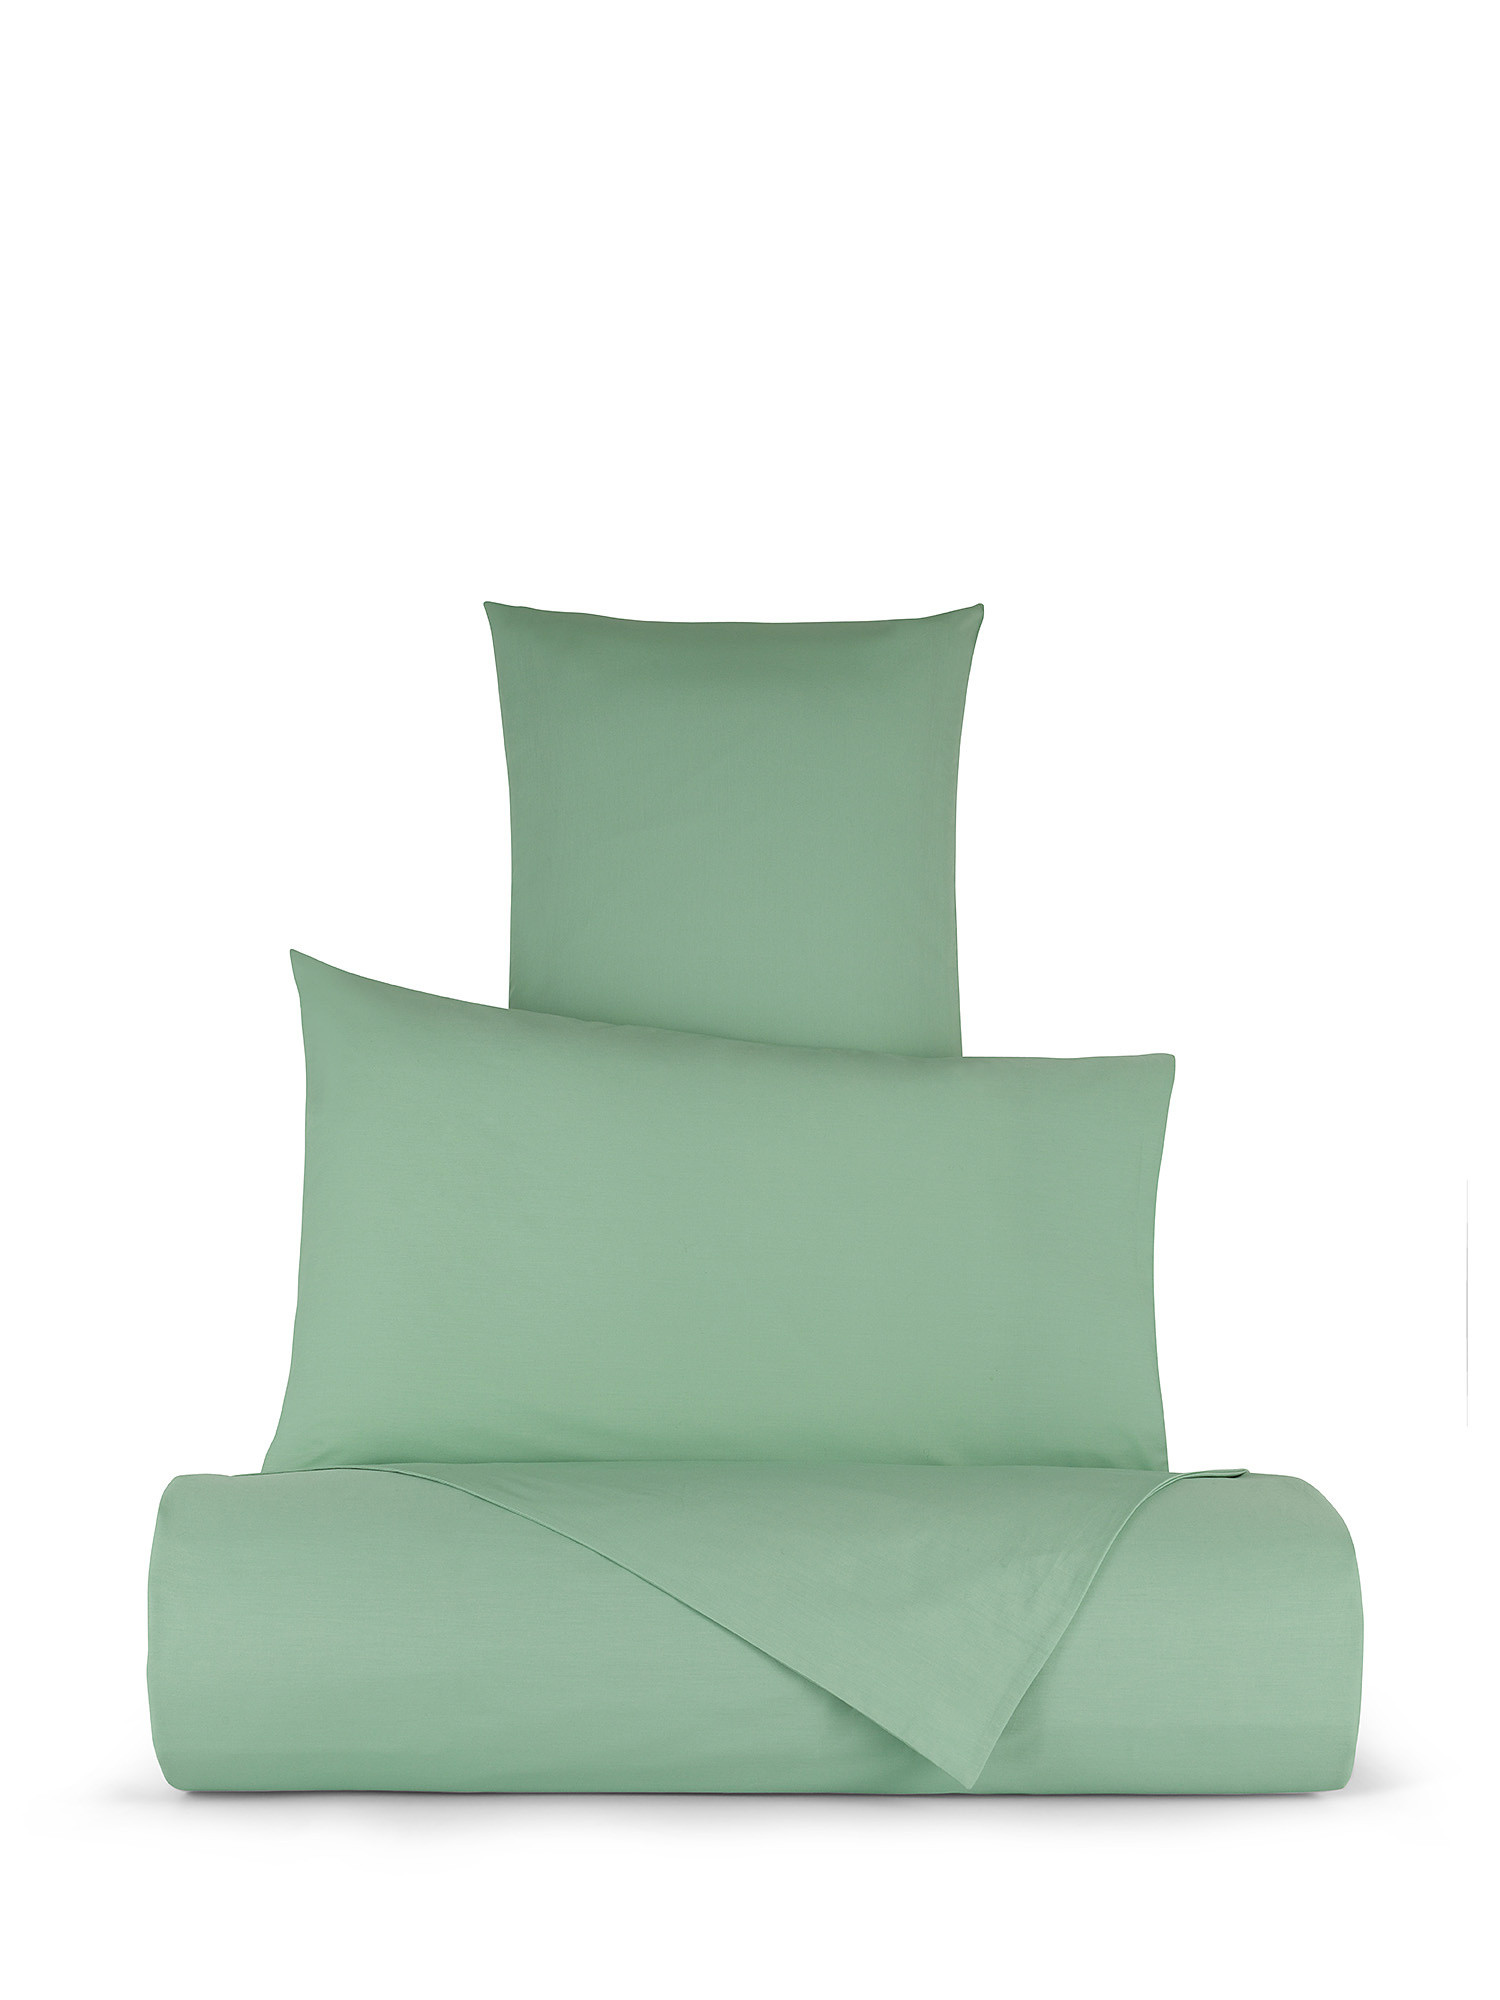 Solid color percale cotton duvet cover set, Light Green, large image number 0